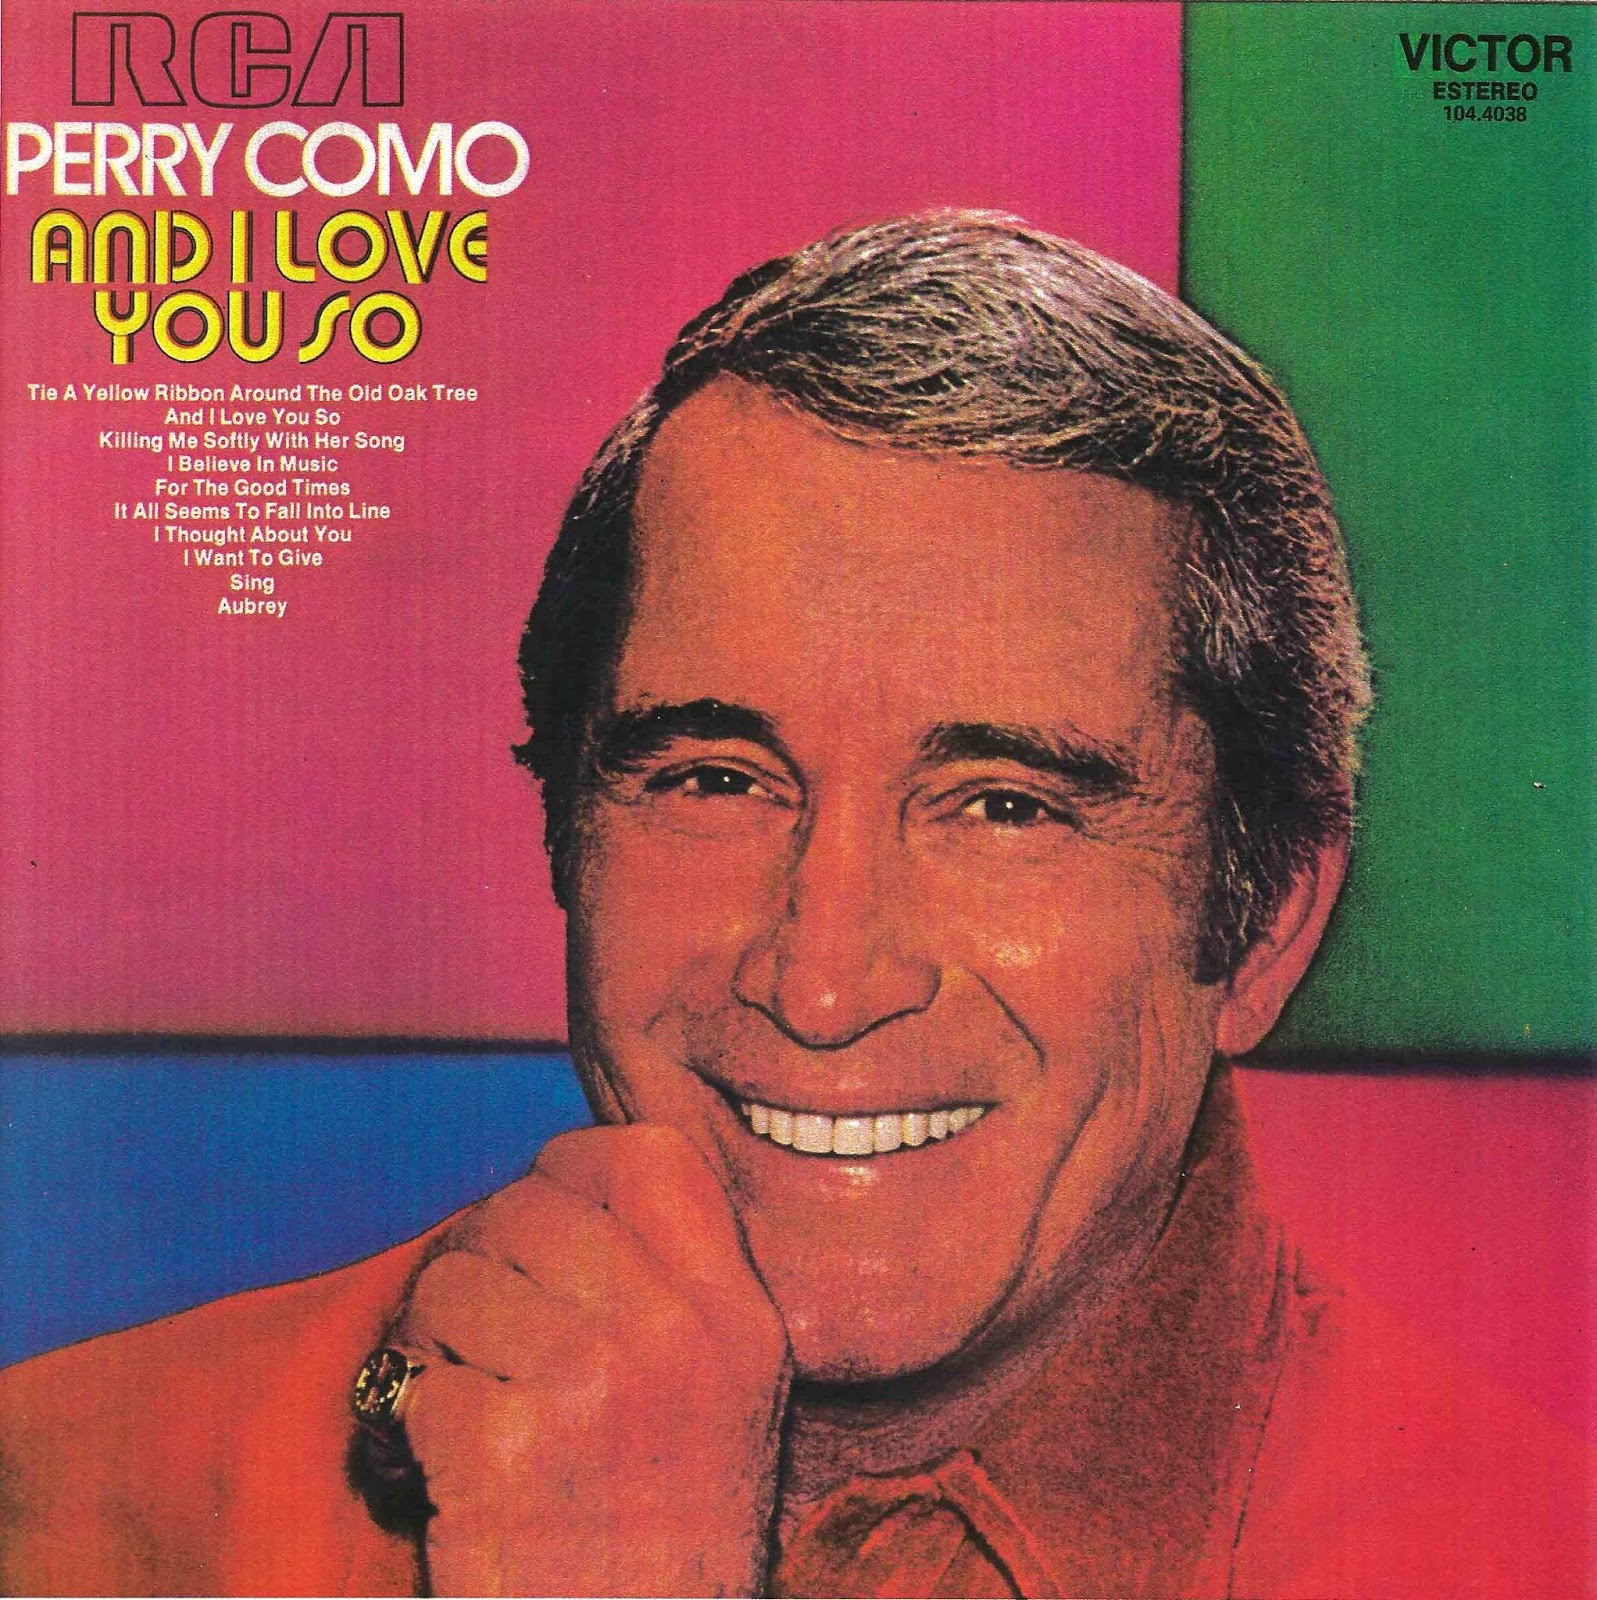 LA PLAYA MUSIC - OLDIES: PERRY COMO - AND I LOVE YOU SO - 1973